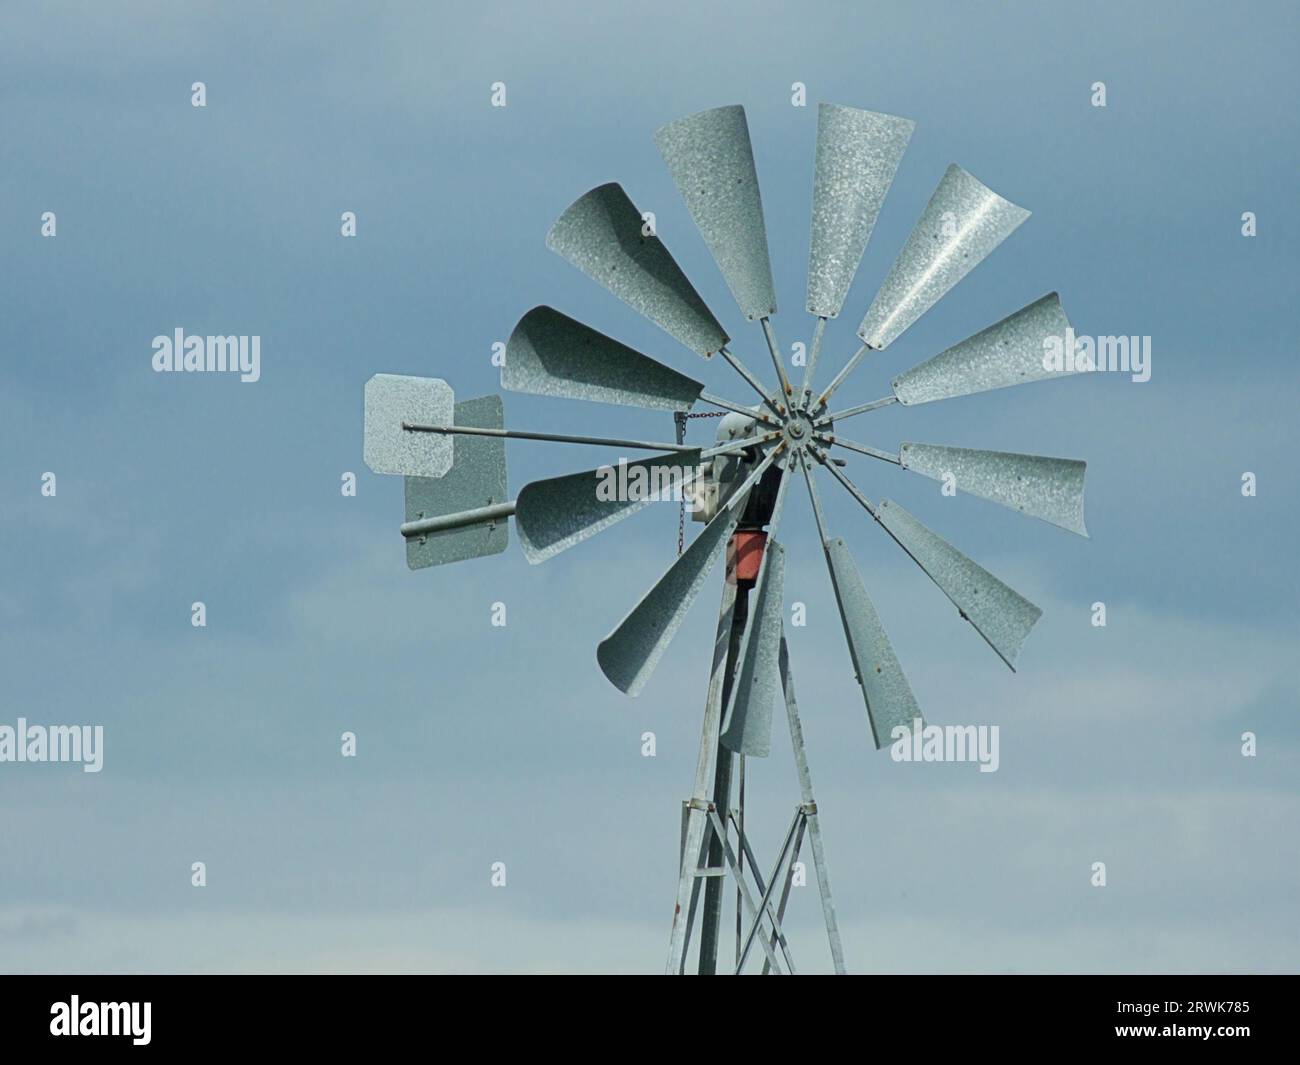 Metal wind direction indicator, background blue sky Stock Photo